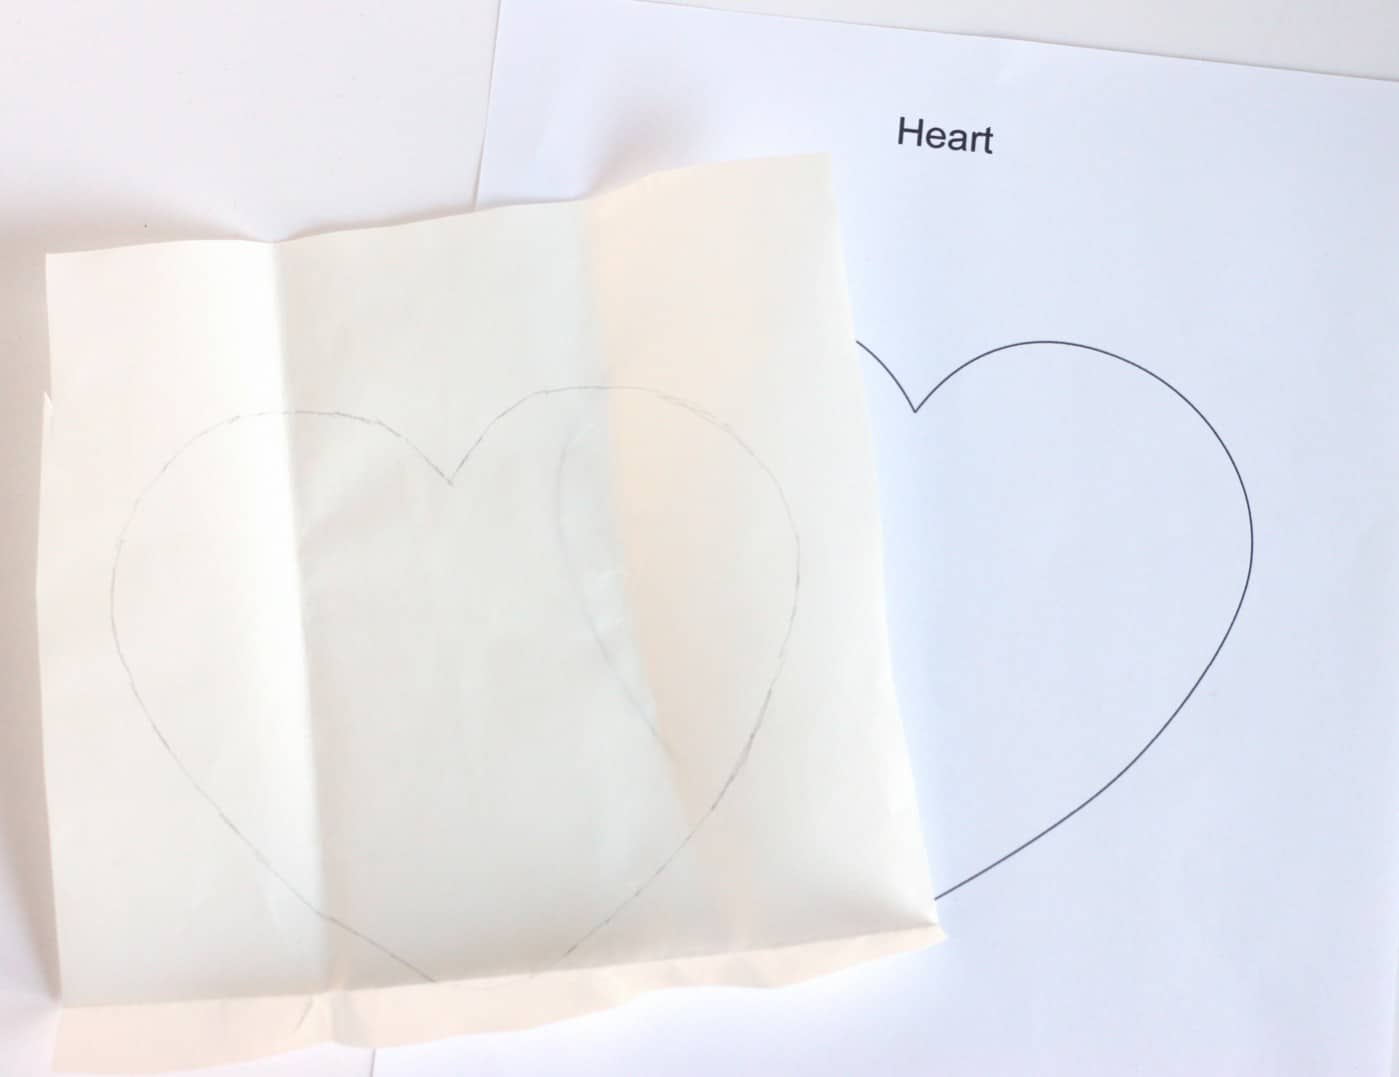 Heart design traced on the paper side of the interfacing